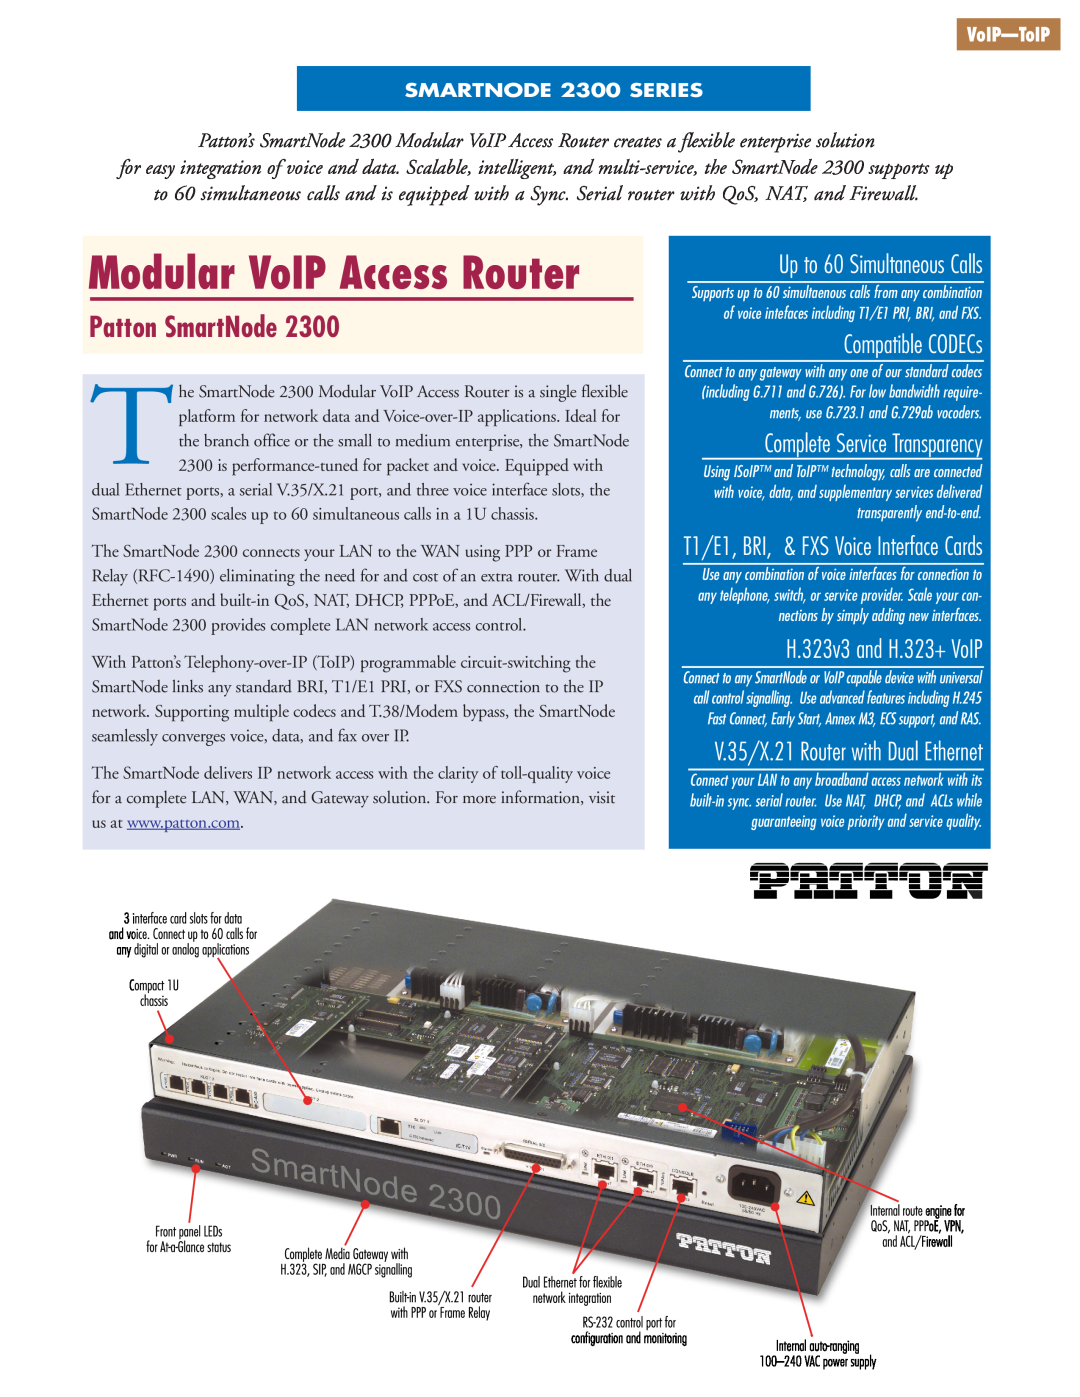 Patton electronic 2300 Series manual Modular VoIP Access Router, Patton SmartNode, H.323v3 and H.323+ VoIP, VoIP-ToIP 